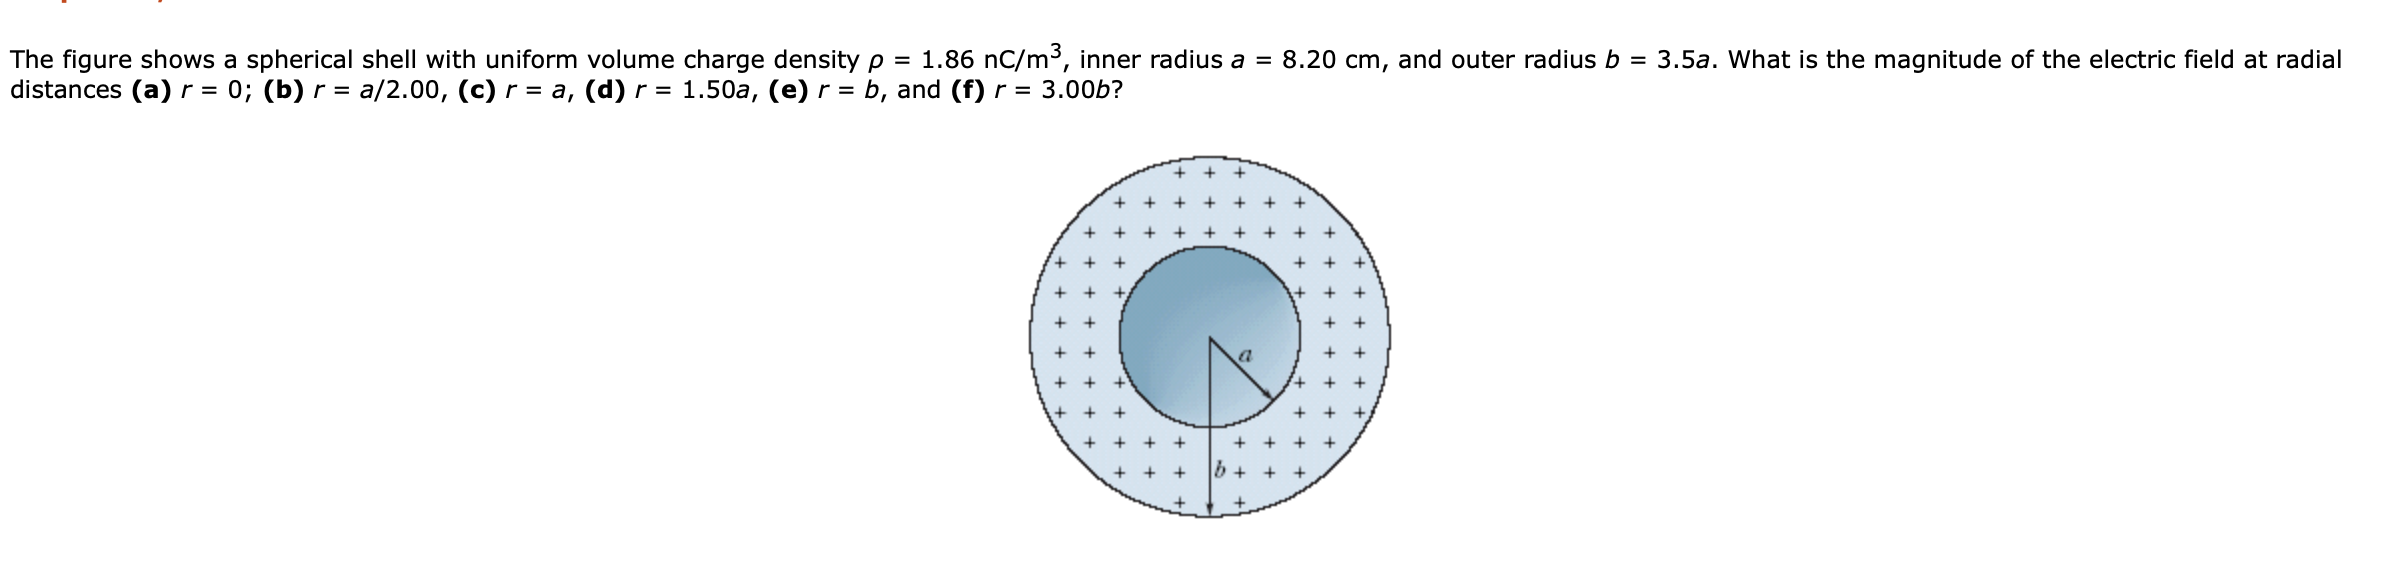 The figure shows a spherical shell with uniform volume charge density p = 1.86 nC/m3, inner radius a = 8.20 cm, and outer radius b = 3.5a. What is the magnitude of the electric field at radial
distances (a) r = 0; (b) r = a/2.00, (c) r = a, (d) r = 1.50a, (e) r = b, and (f) r = 3.00b?
%3D
